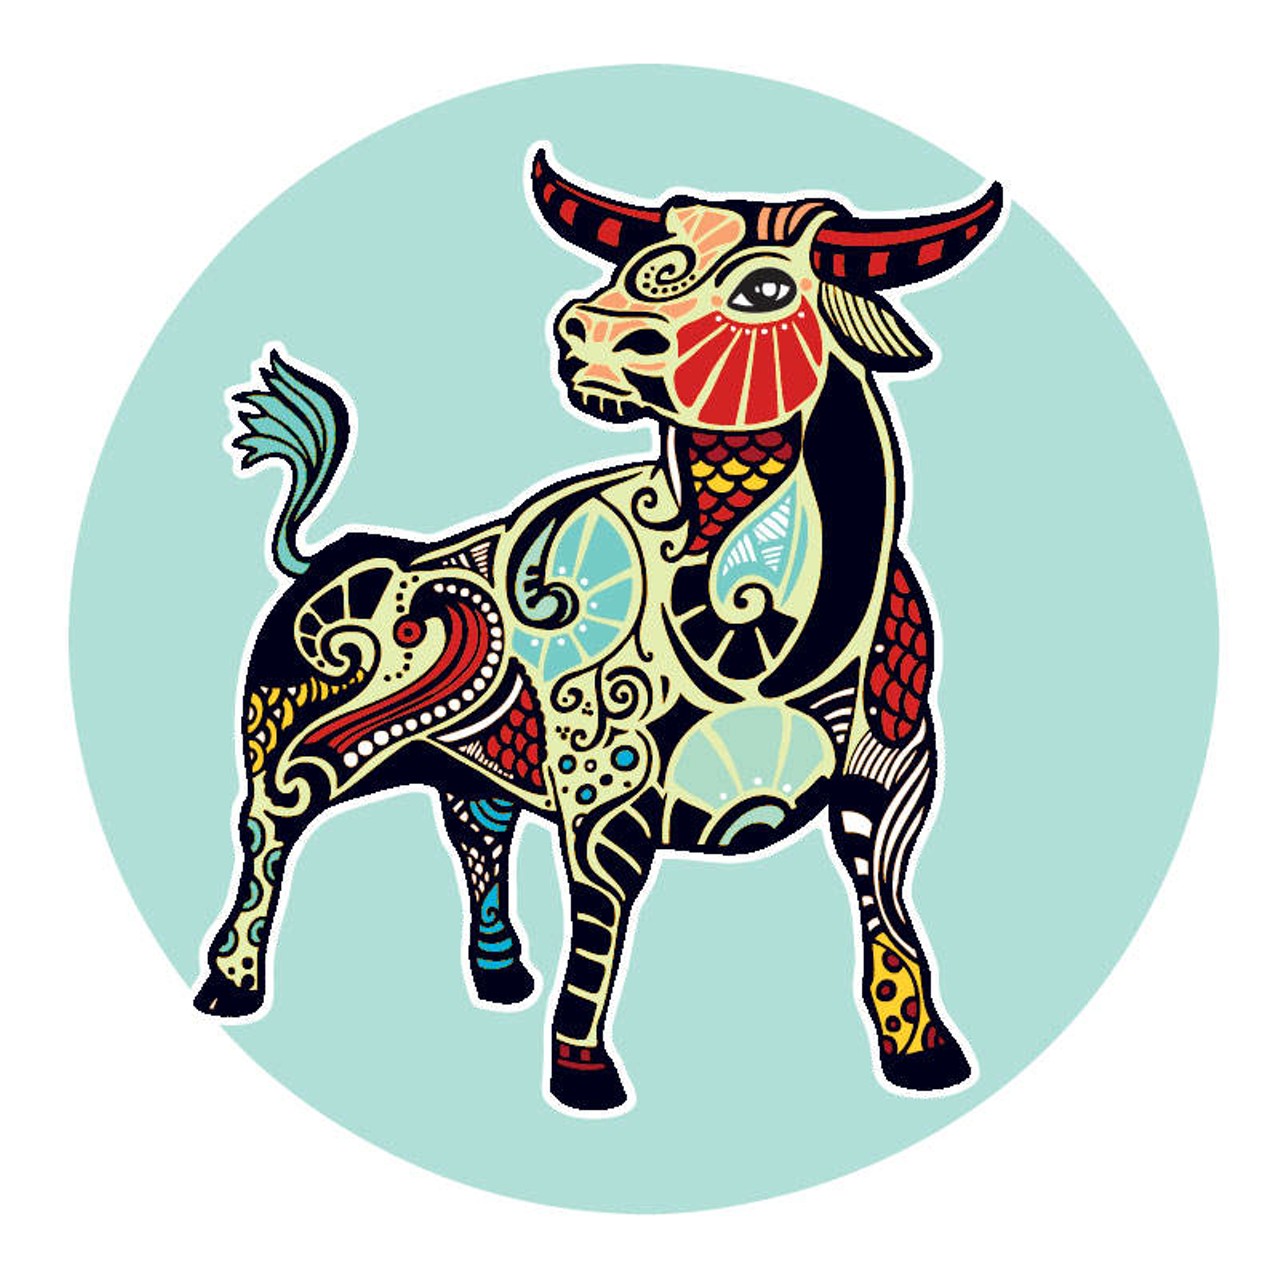 TAURUS (April 21 -May 20): 
You are beginning to see that it never works to get too wound up about things. People and situations change at an hourly rate. From where you sit now recent hassles have receded to a place that allows room for things that are much more healing and constructive to enter. Something in you has been restored to the faith that everything really is going to be all right. In the meantime, your work is about to involve major adjustments, that will feel cataclysmic or easy depending on your ability to see how much of what you&#146;re doing is still working for you or not.